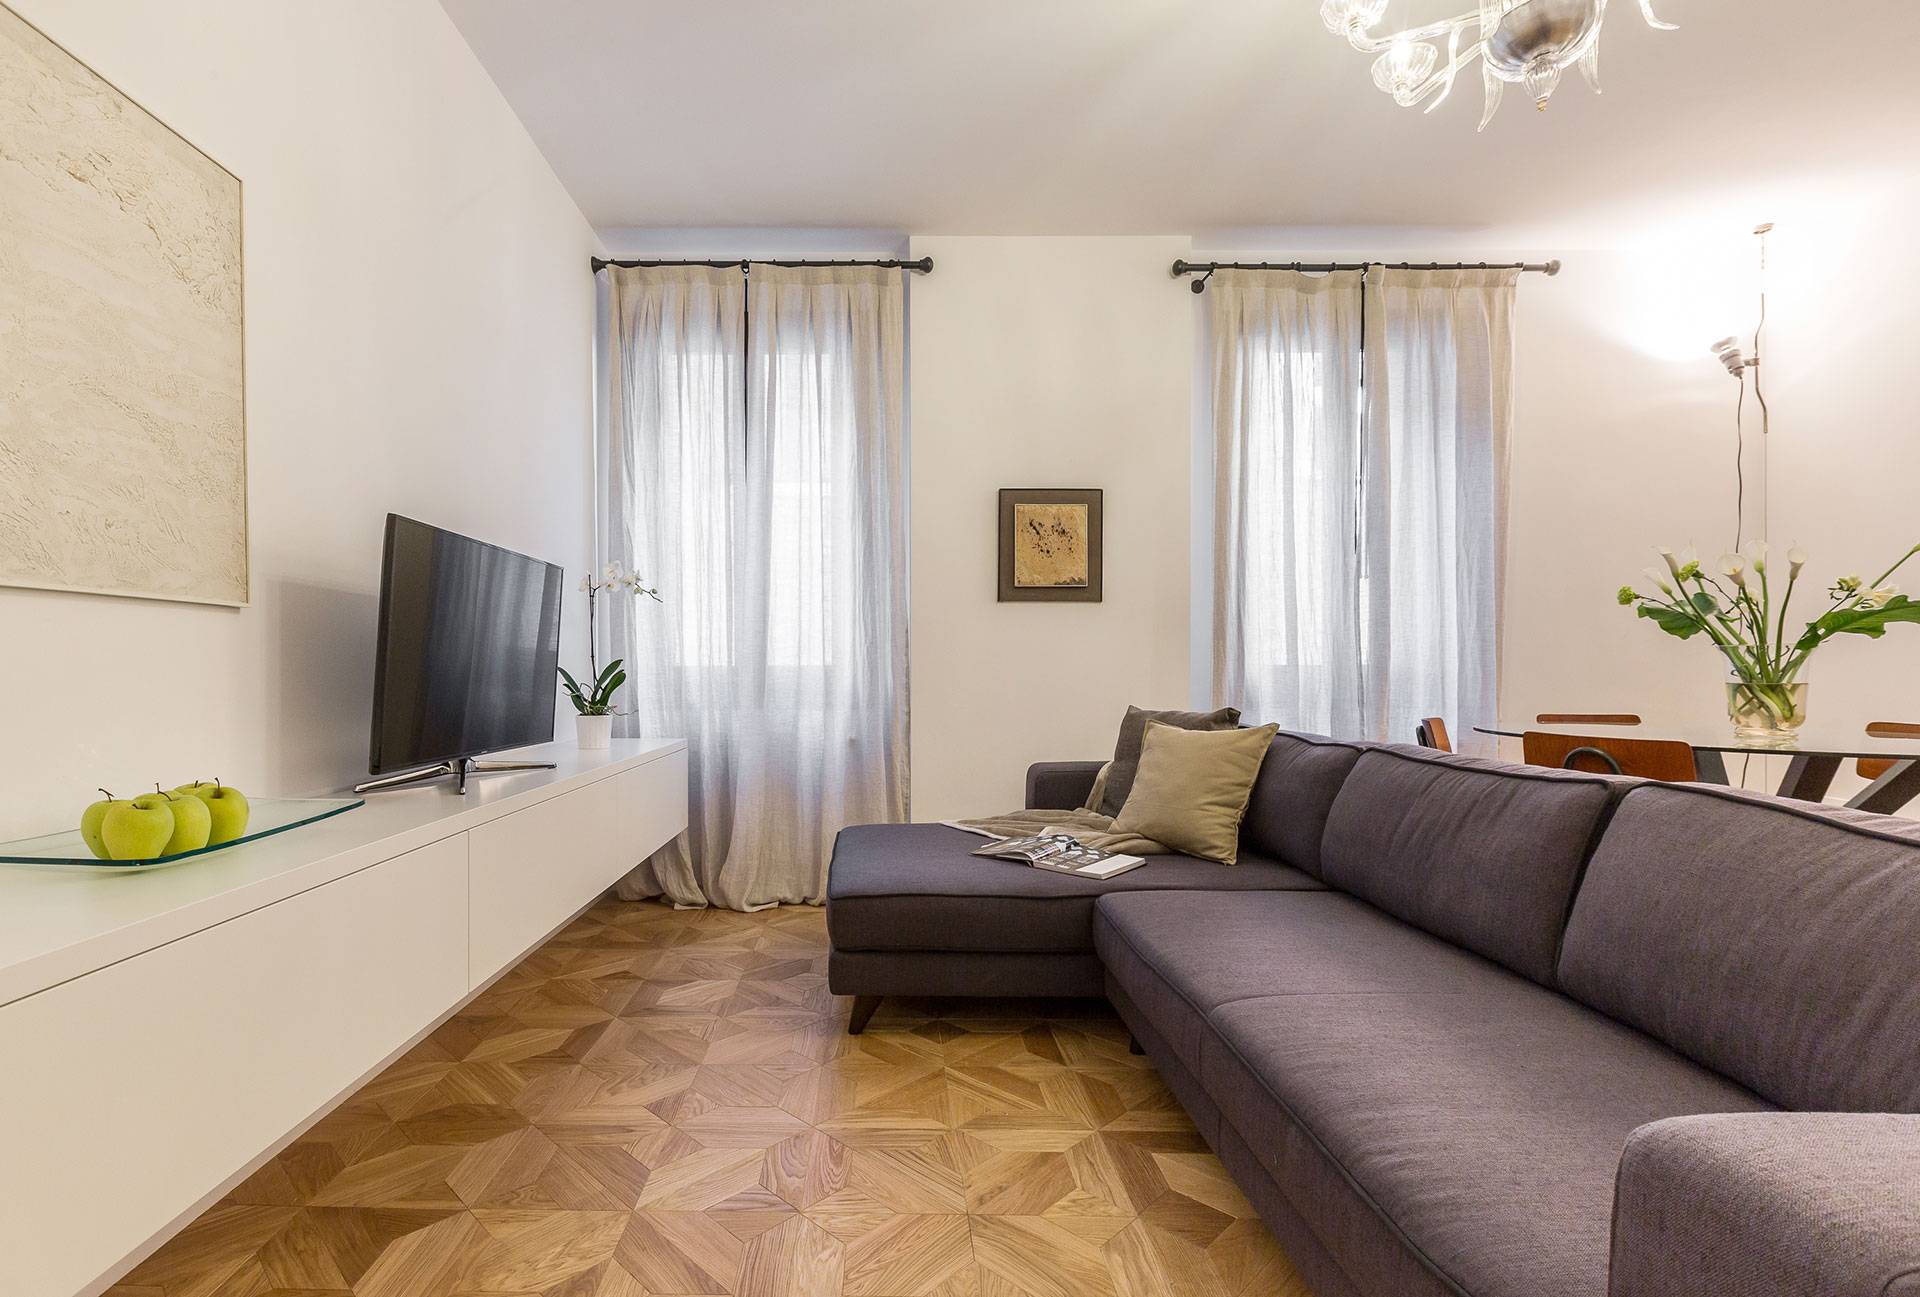 the Aida apartment living room: style and comfort guaranteed